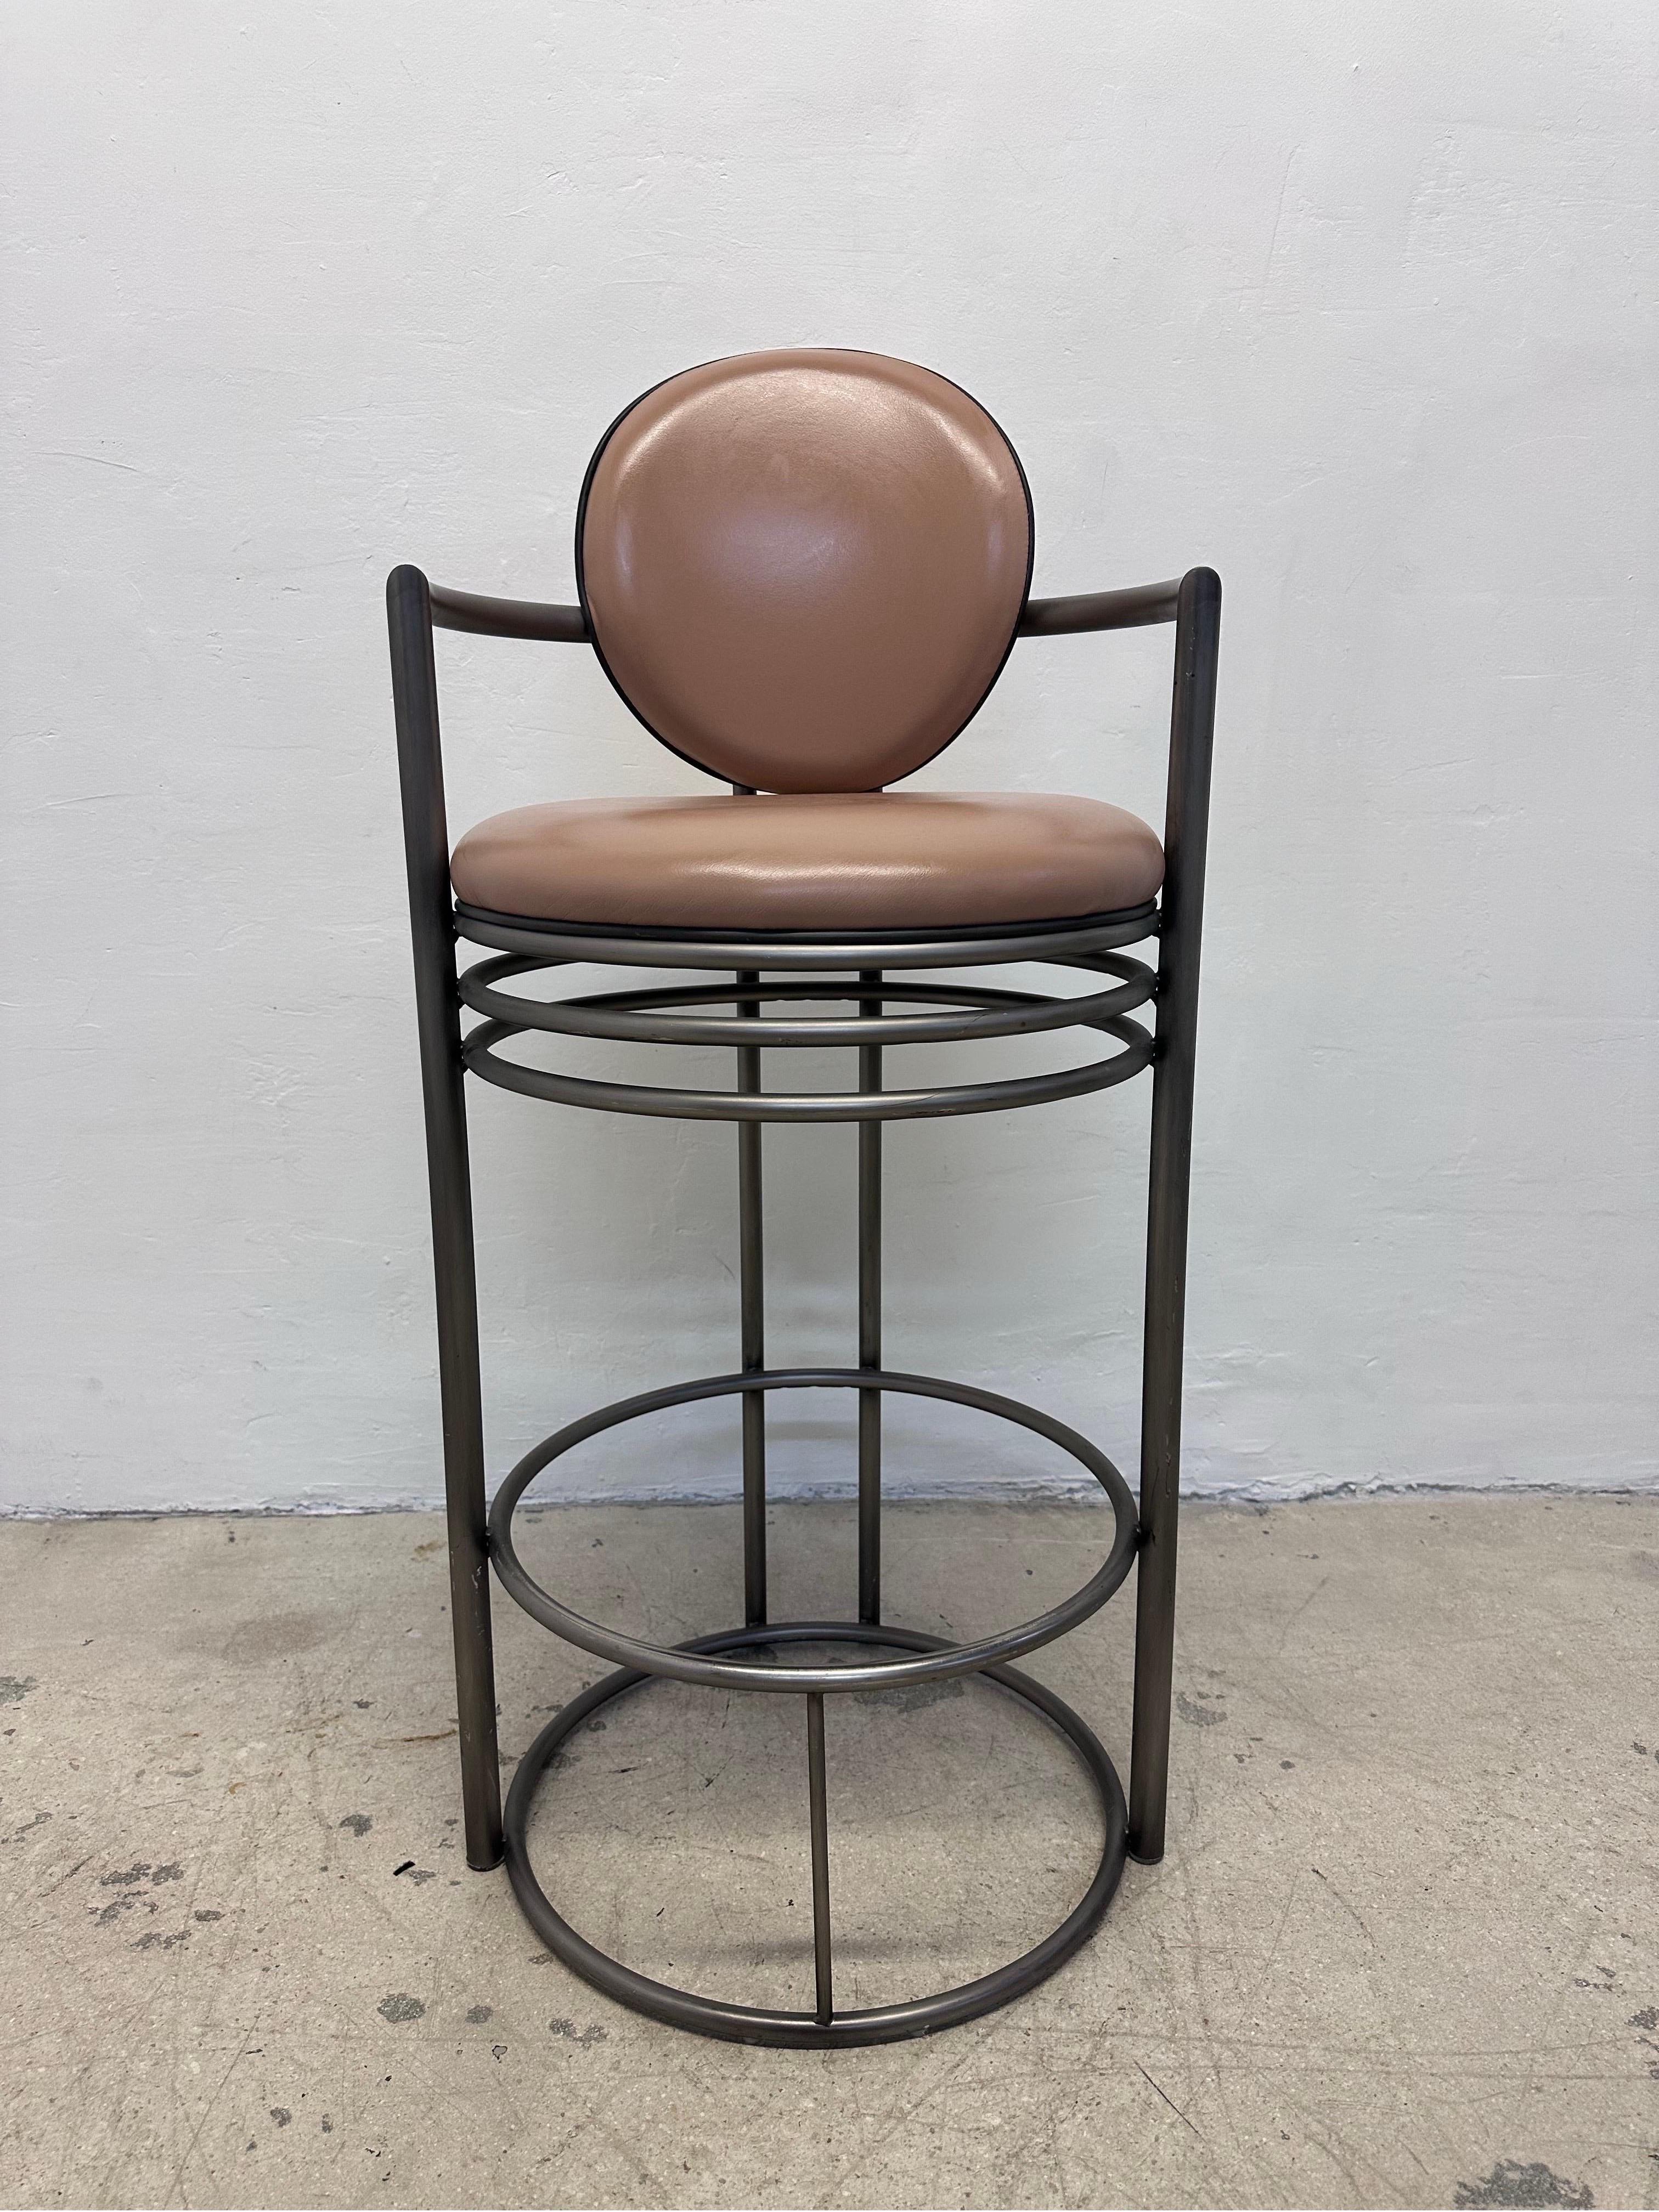 Design Institute America Deco Revival Bar Stools With Arms, 1980s - Set of Three For Sale 1